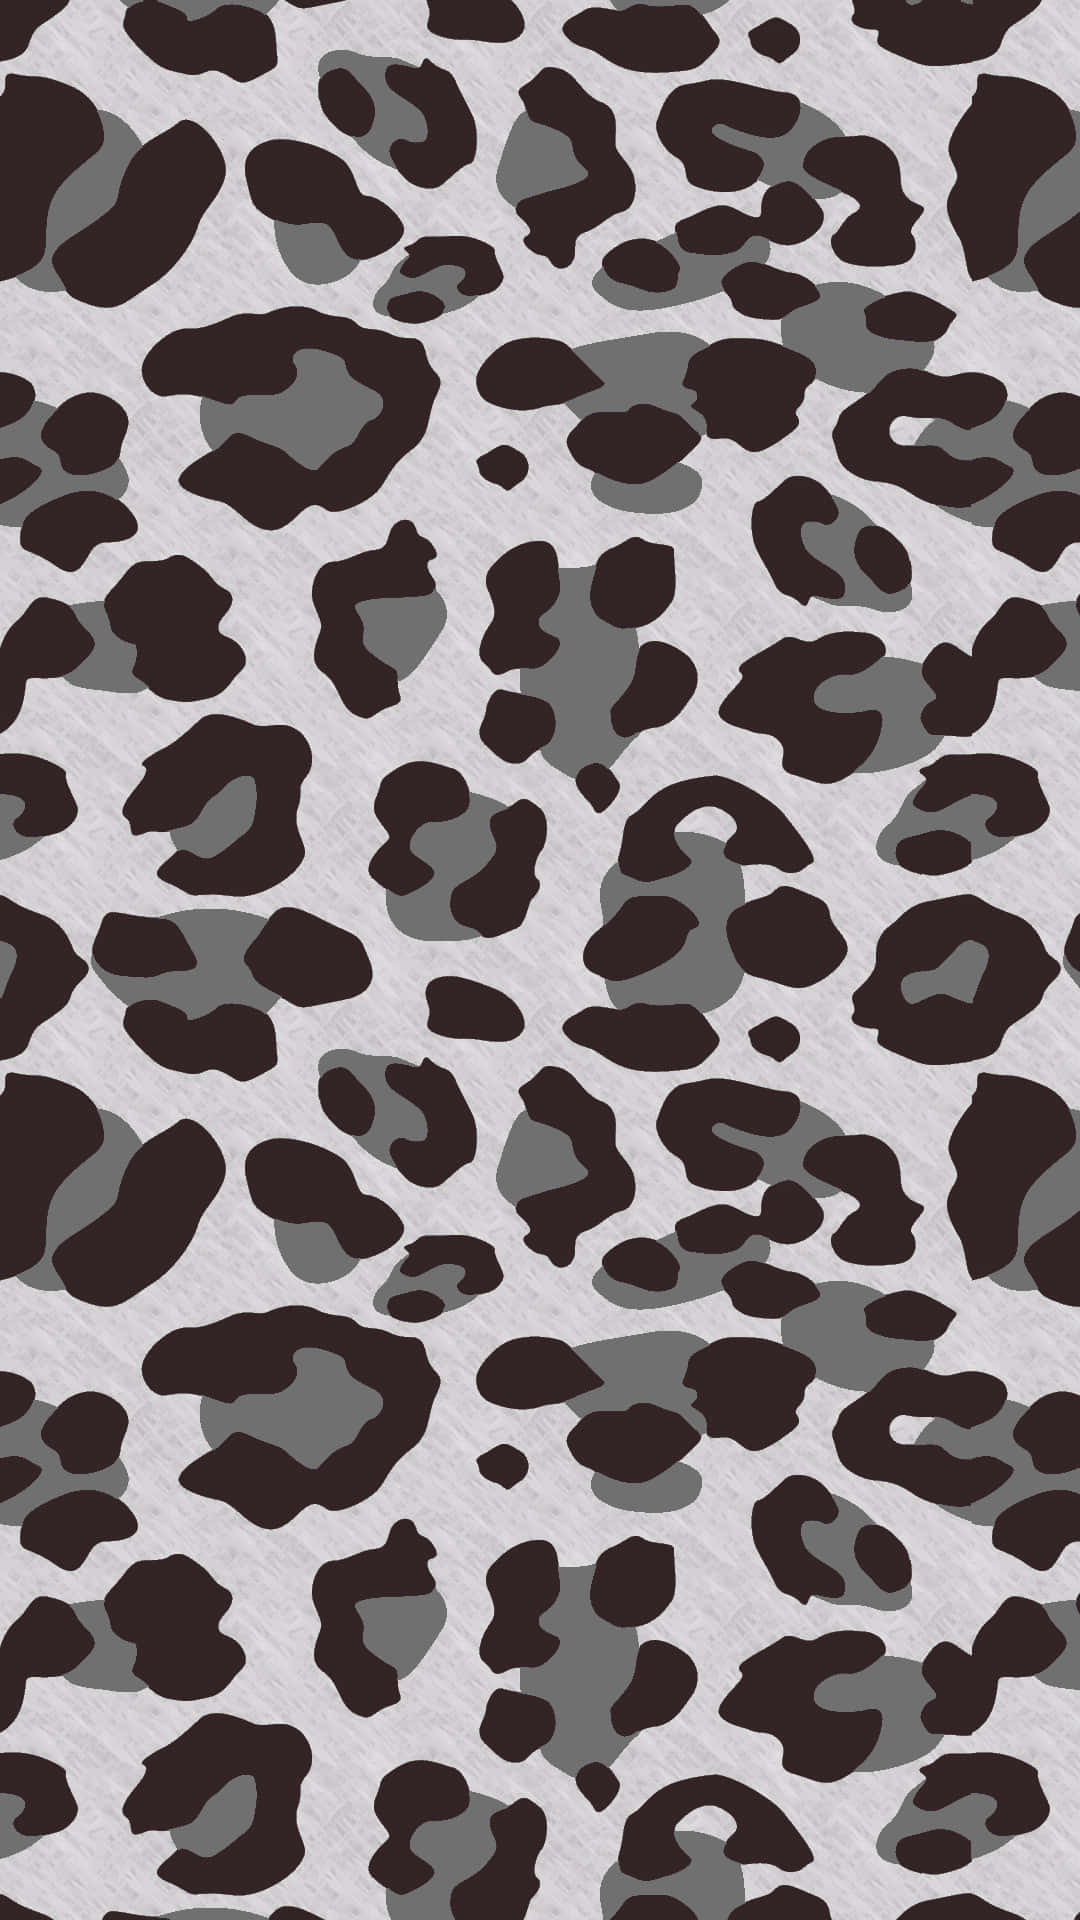 Get spotted with this Animal Print iPhone! Wallpaper